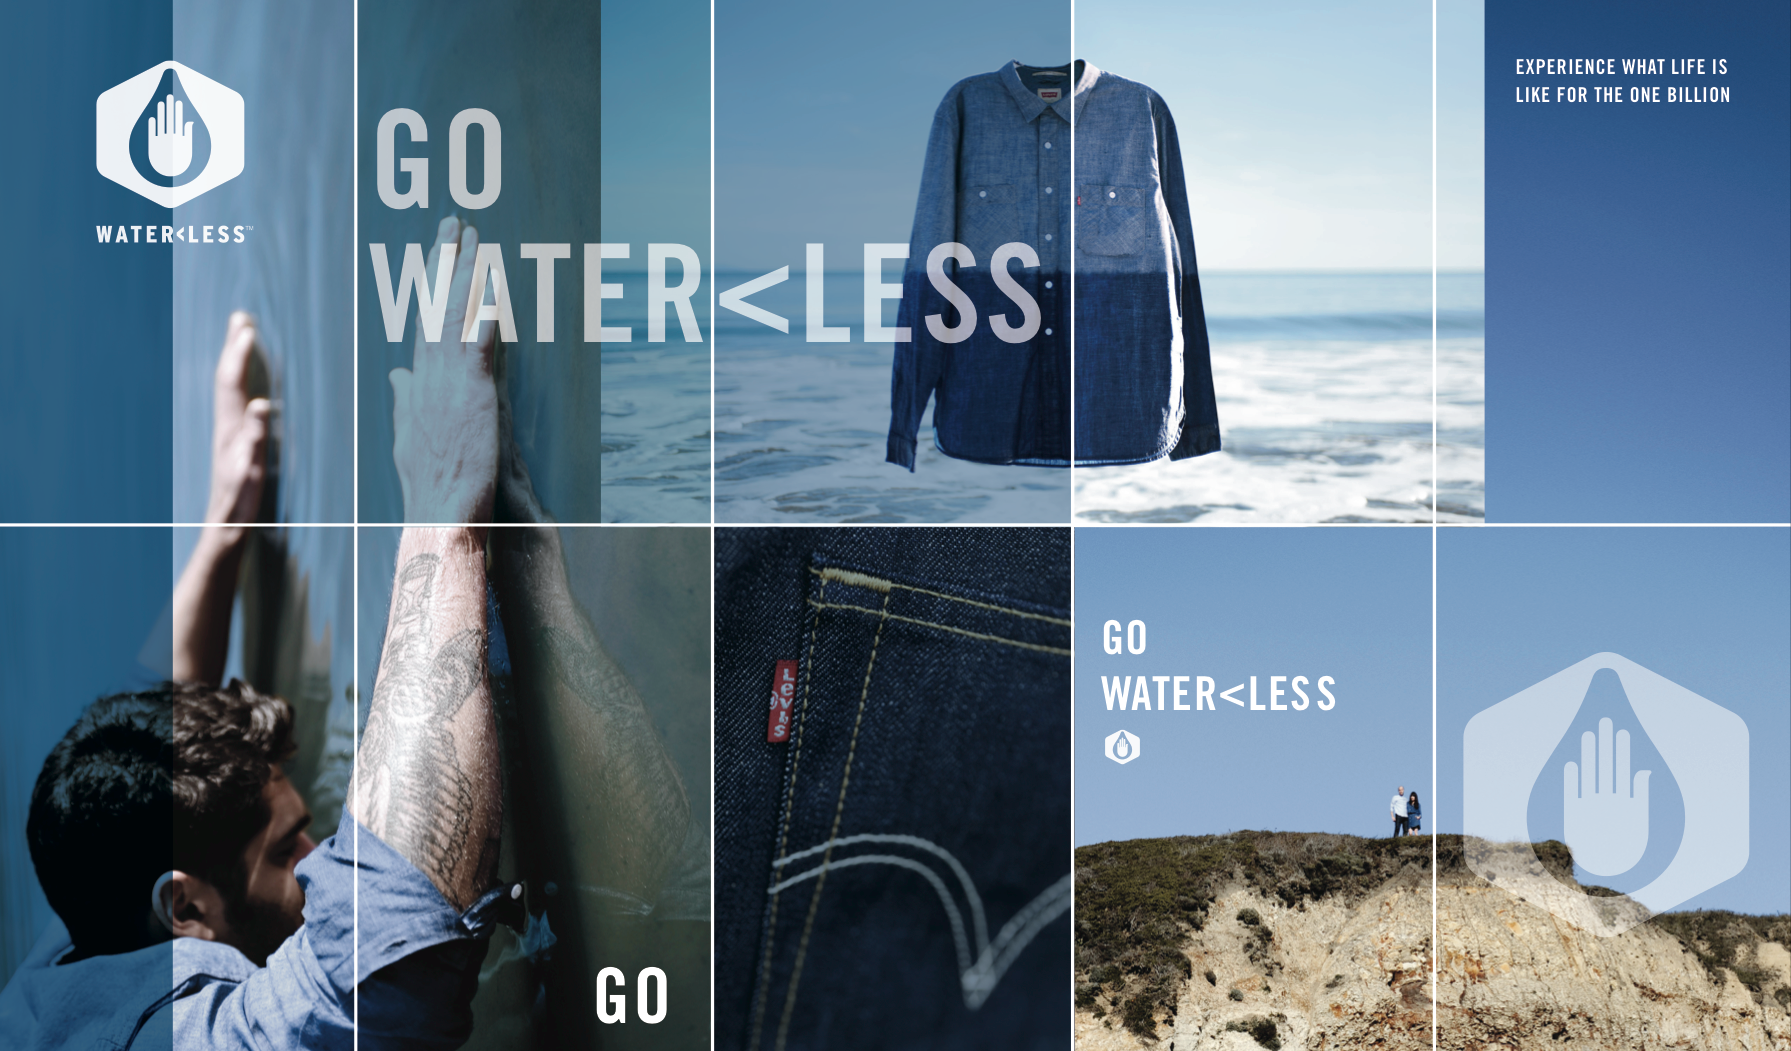 levis waterless campaign